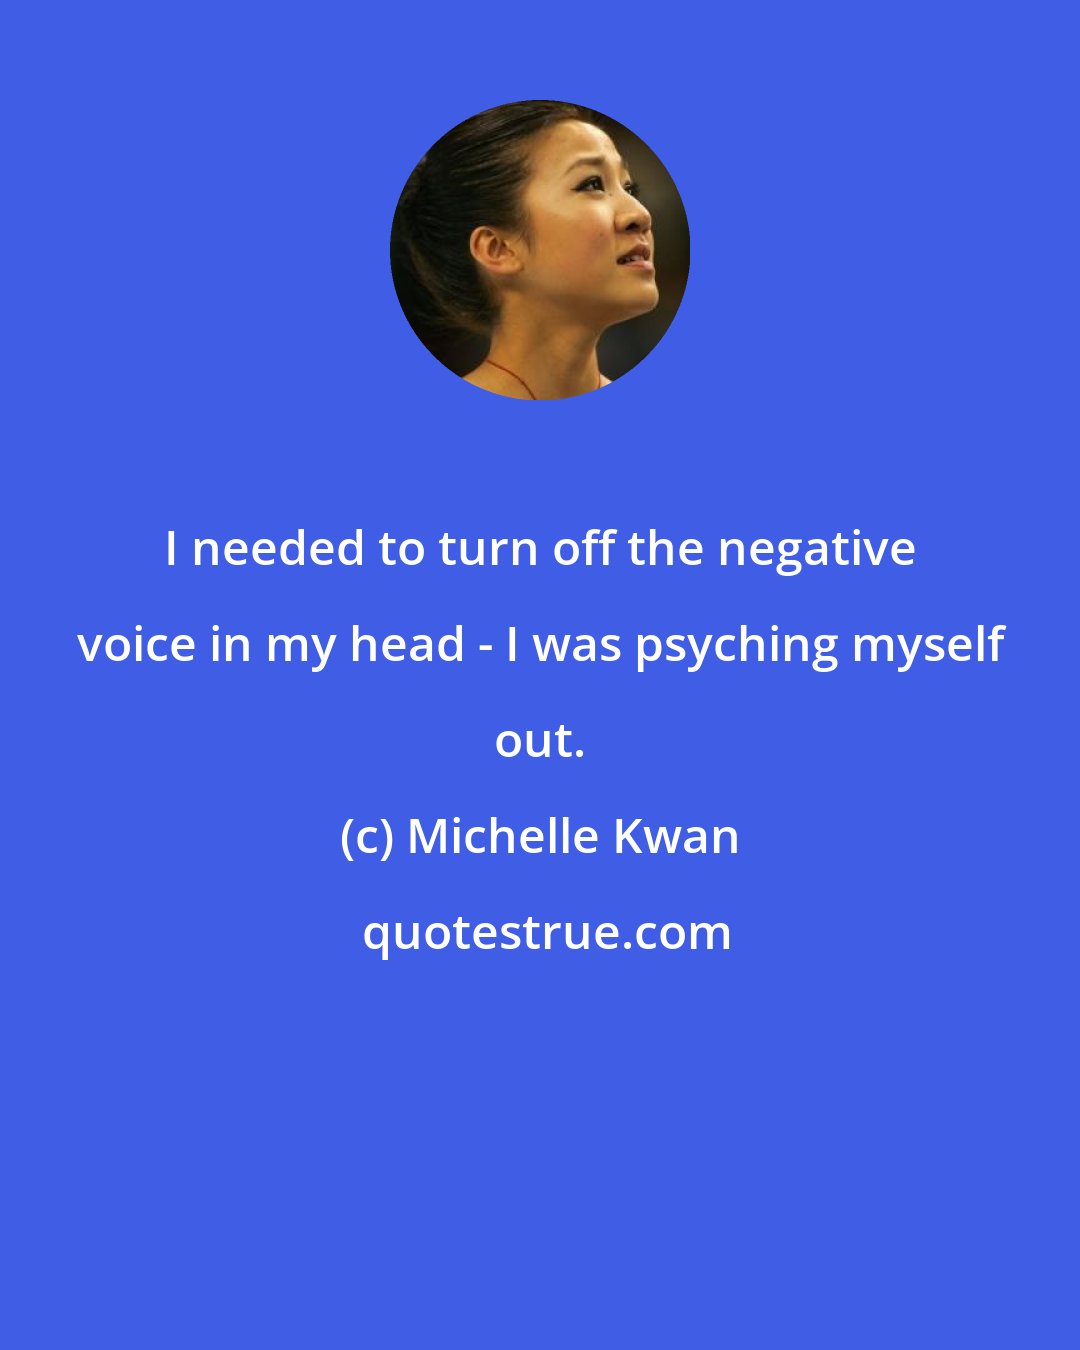 Michelle Kwan: I needed to turn off the negative voice in my head - I was psyching myself out.